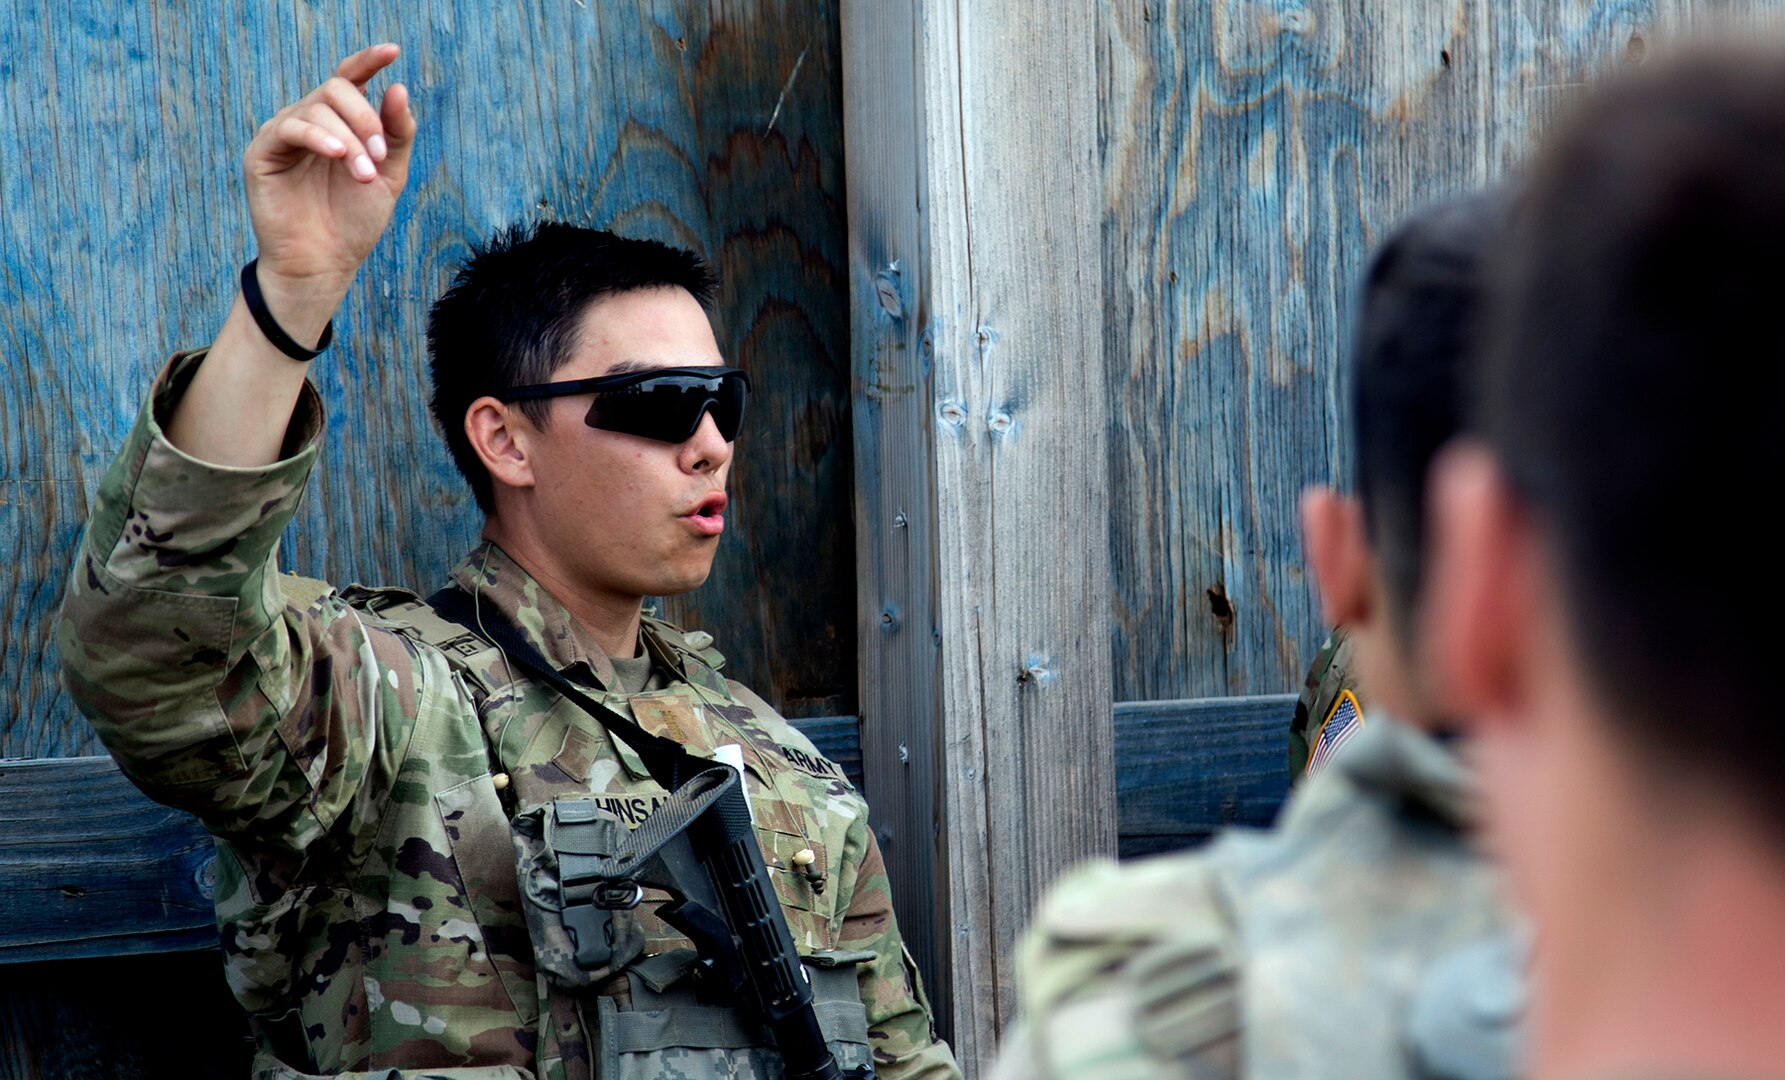 2nd Lt. Andrew Shinsako, platoon leader for Alpha Company, 1st Platoon, 1st Battalion, 178th Infantry Regiment provides feedback to his troops after a blank fire interation during Rising Thunder 19.